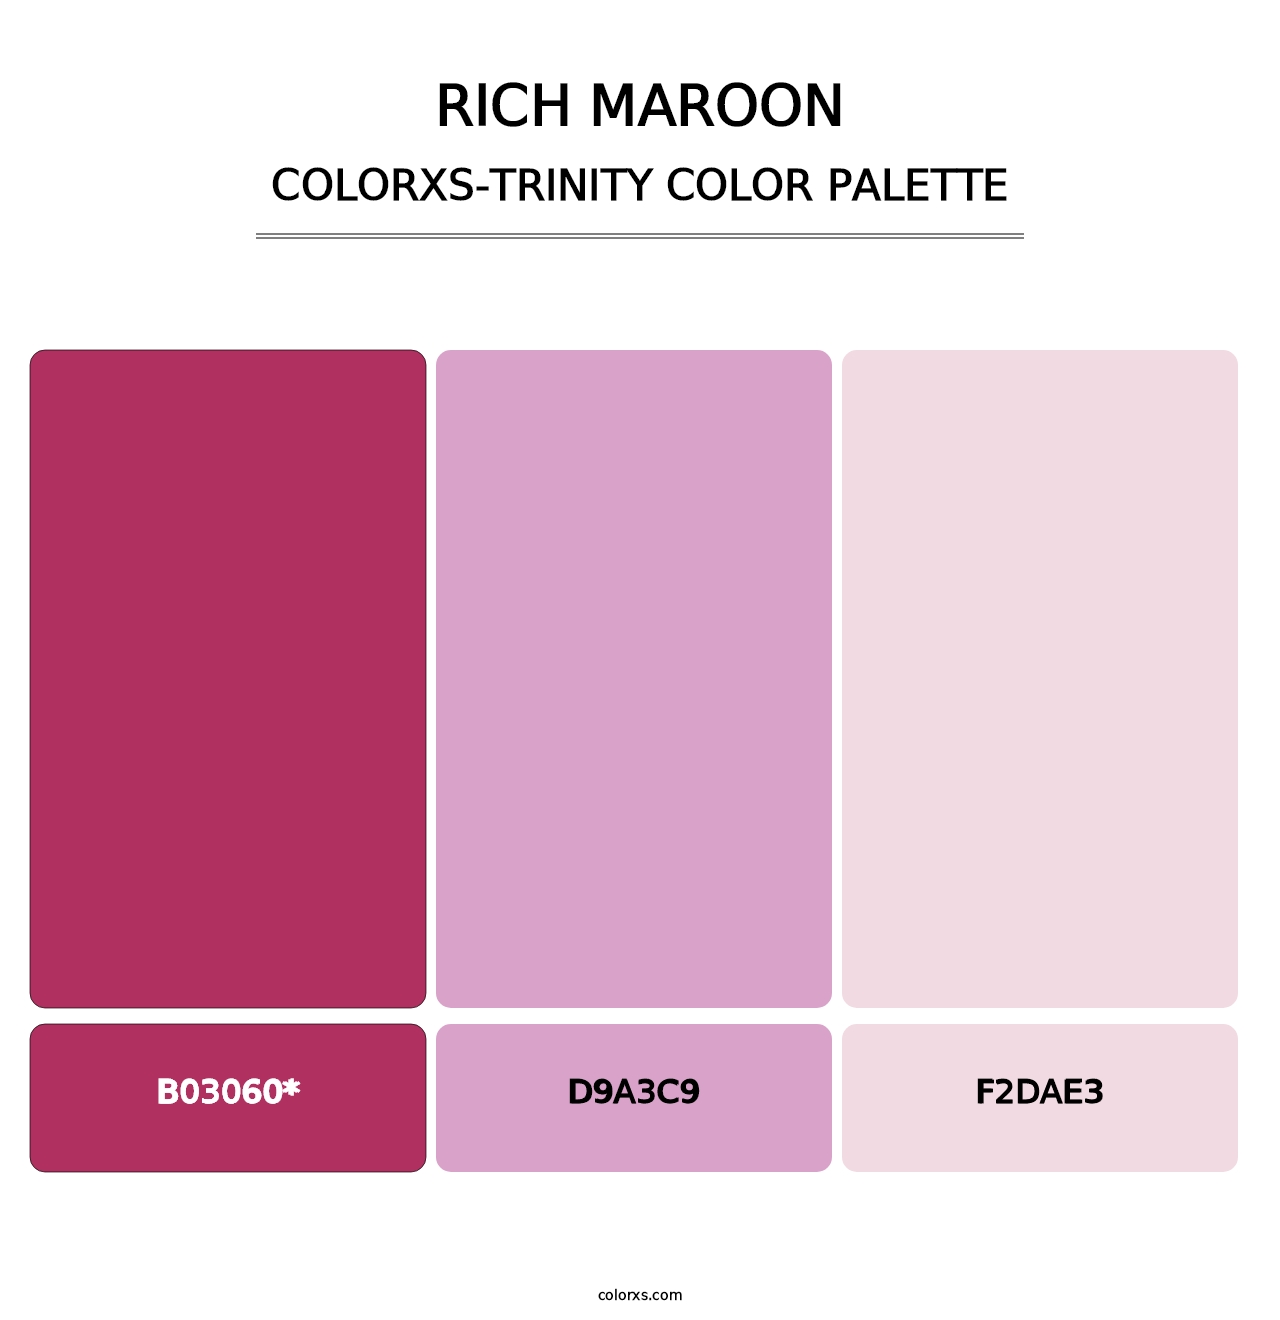 Rich Maroon - Colorxs Trinity Palette